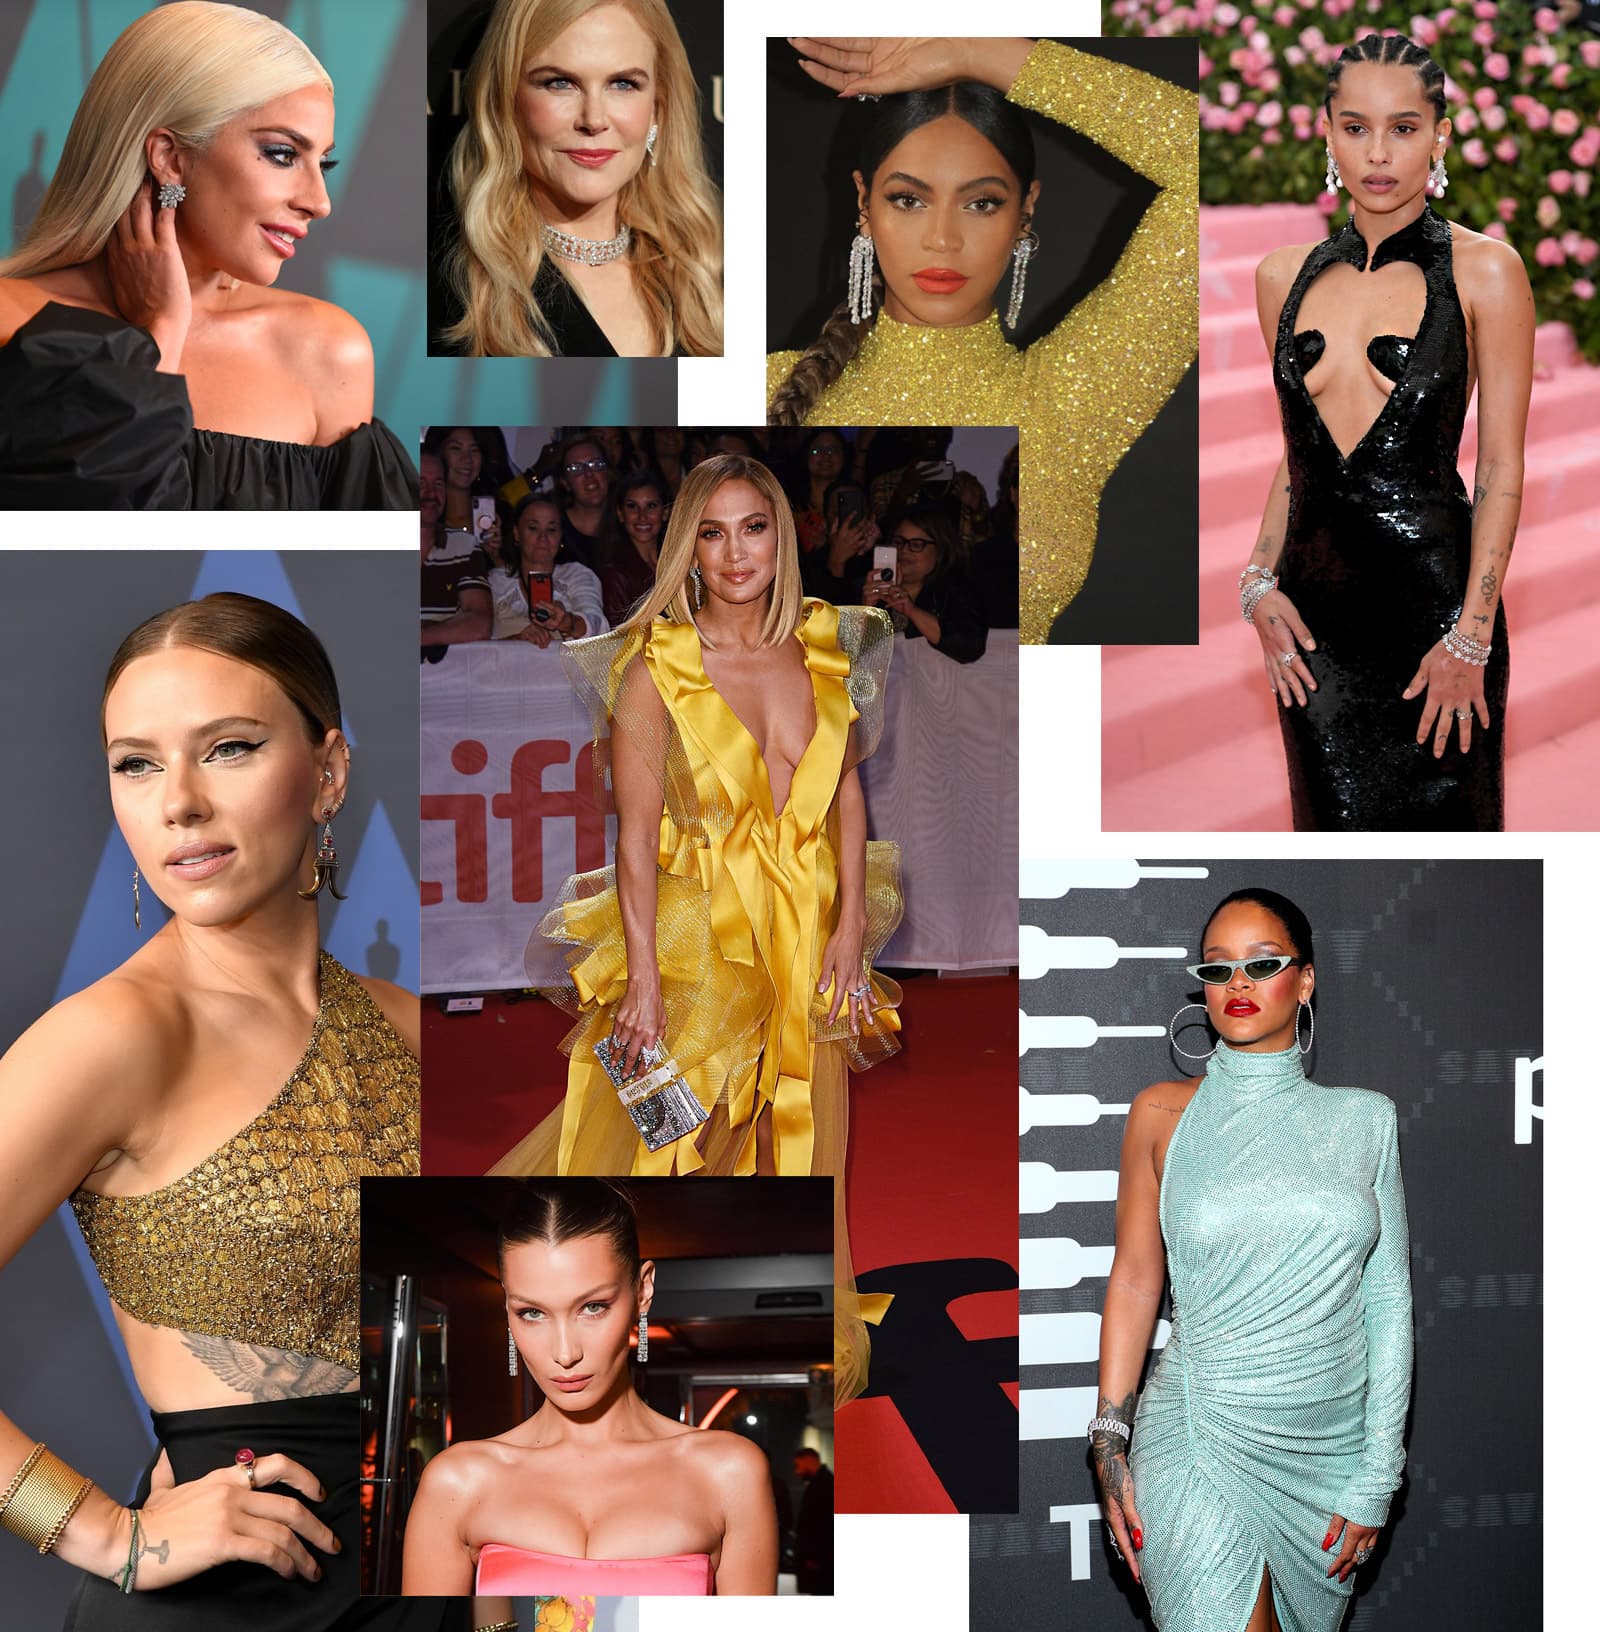 Stars wearing a variety of fine jewellery provided by D’Orazio & Associates PR on the red carpet